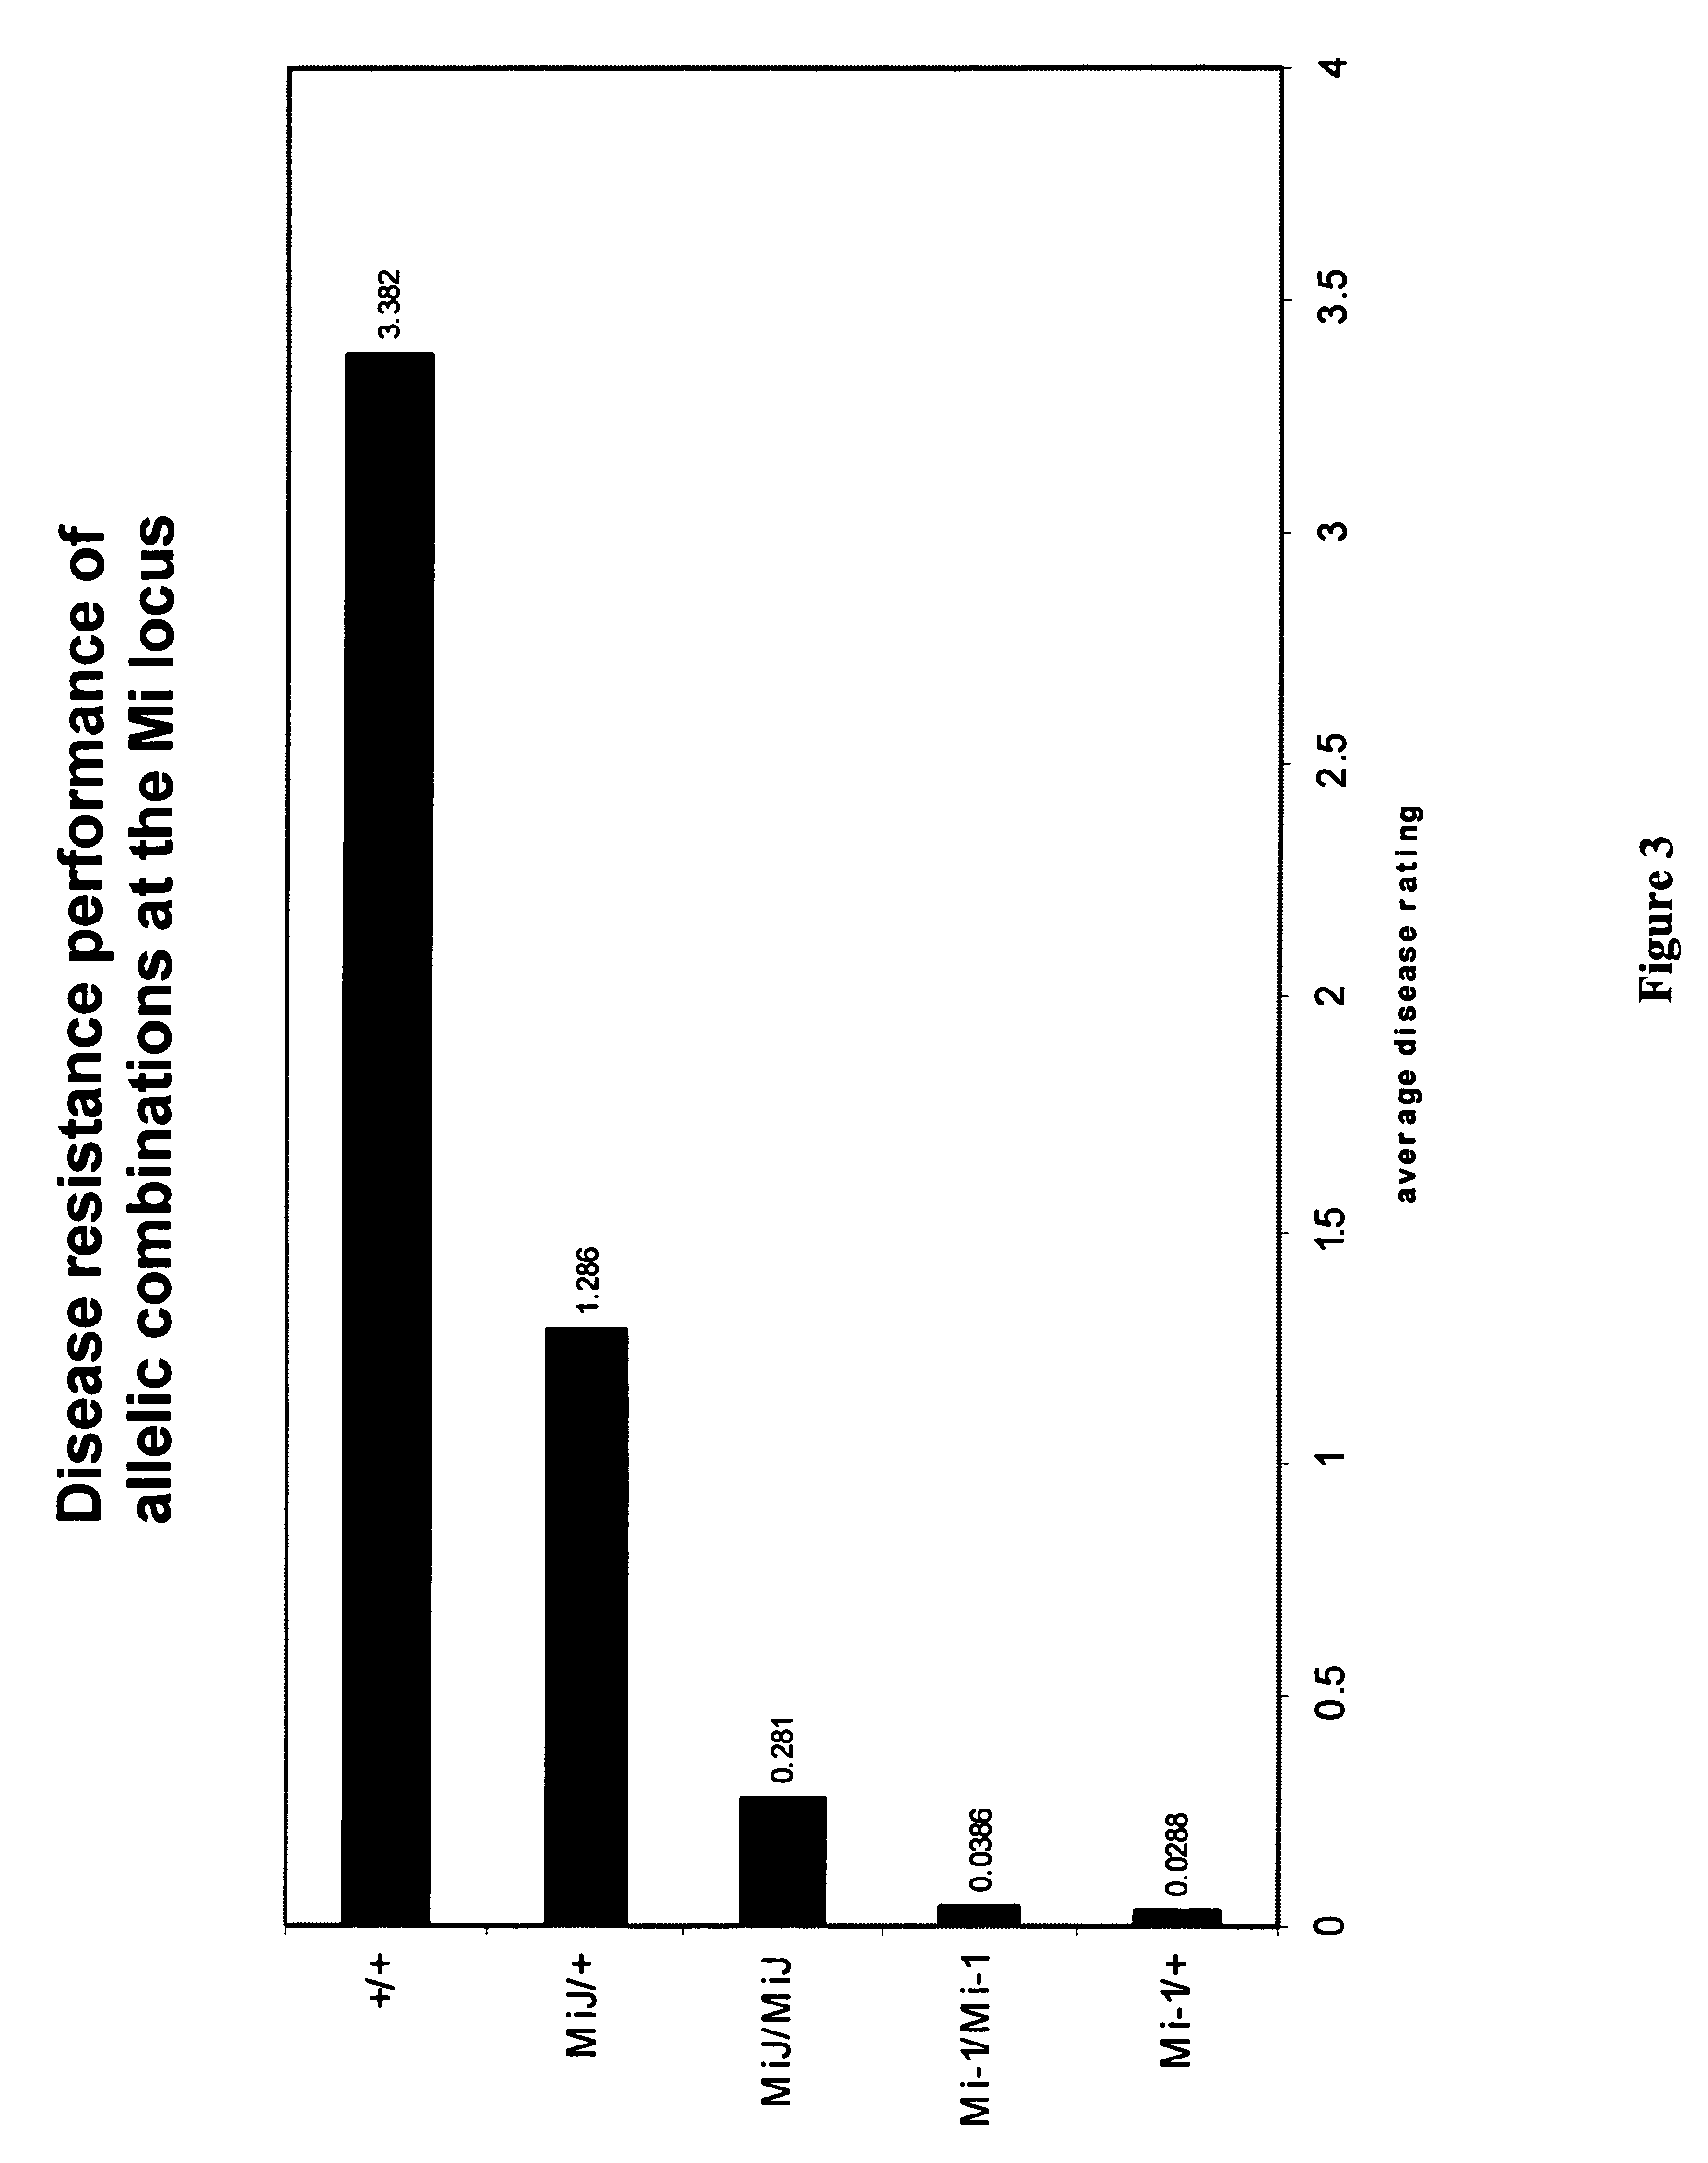 Methods for coupling resistance alleles in tomato